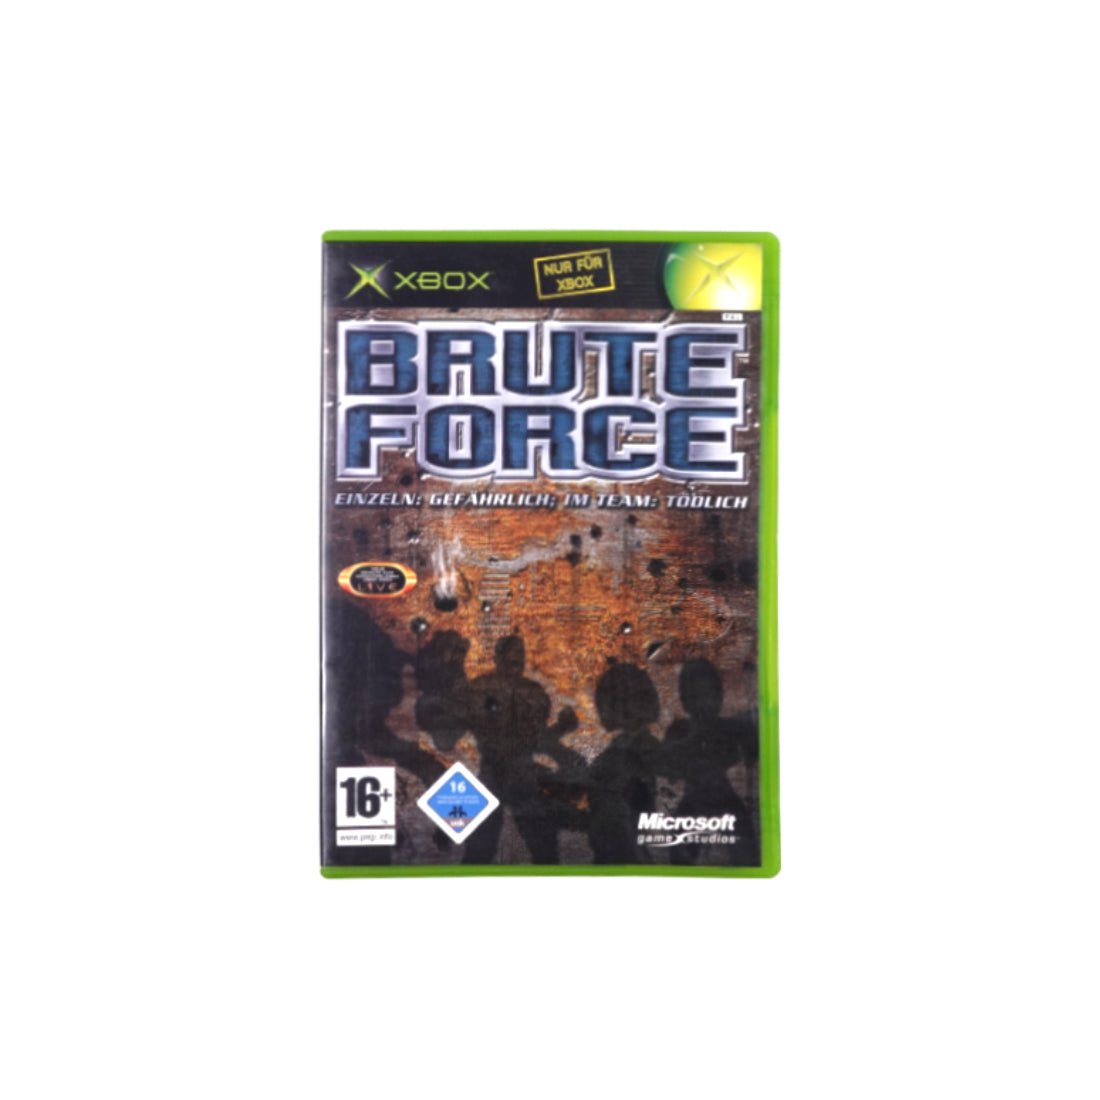 (Pre-Owned) Brute Force: German Edition - Xbox - Store 974 | ستور ٩٧٤